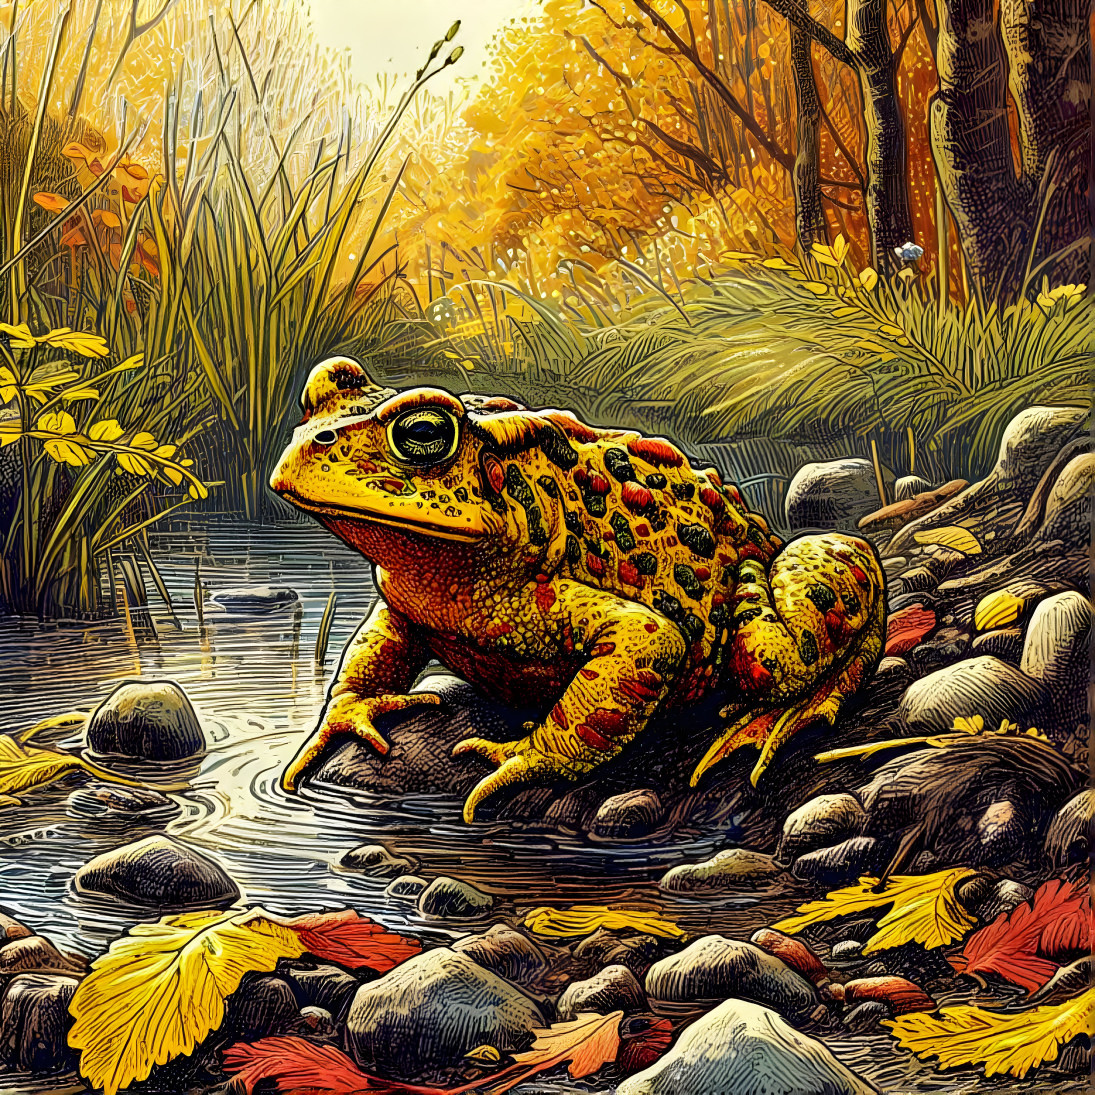 Yellow-Bellied Toad